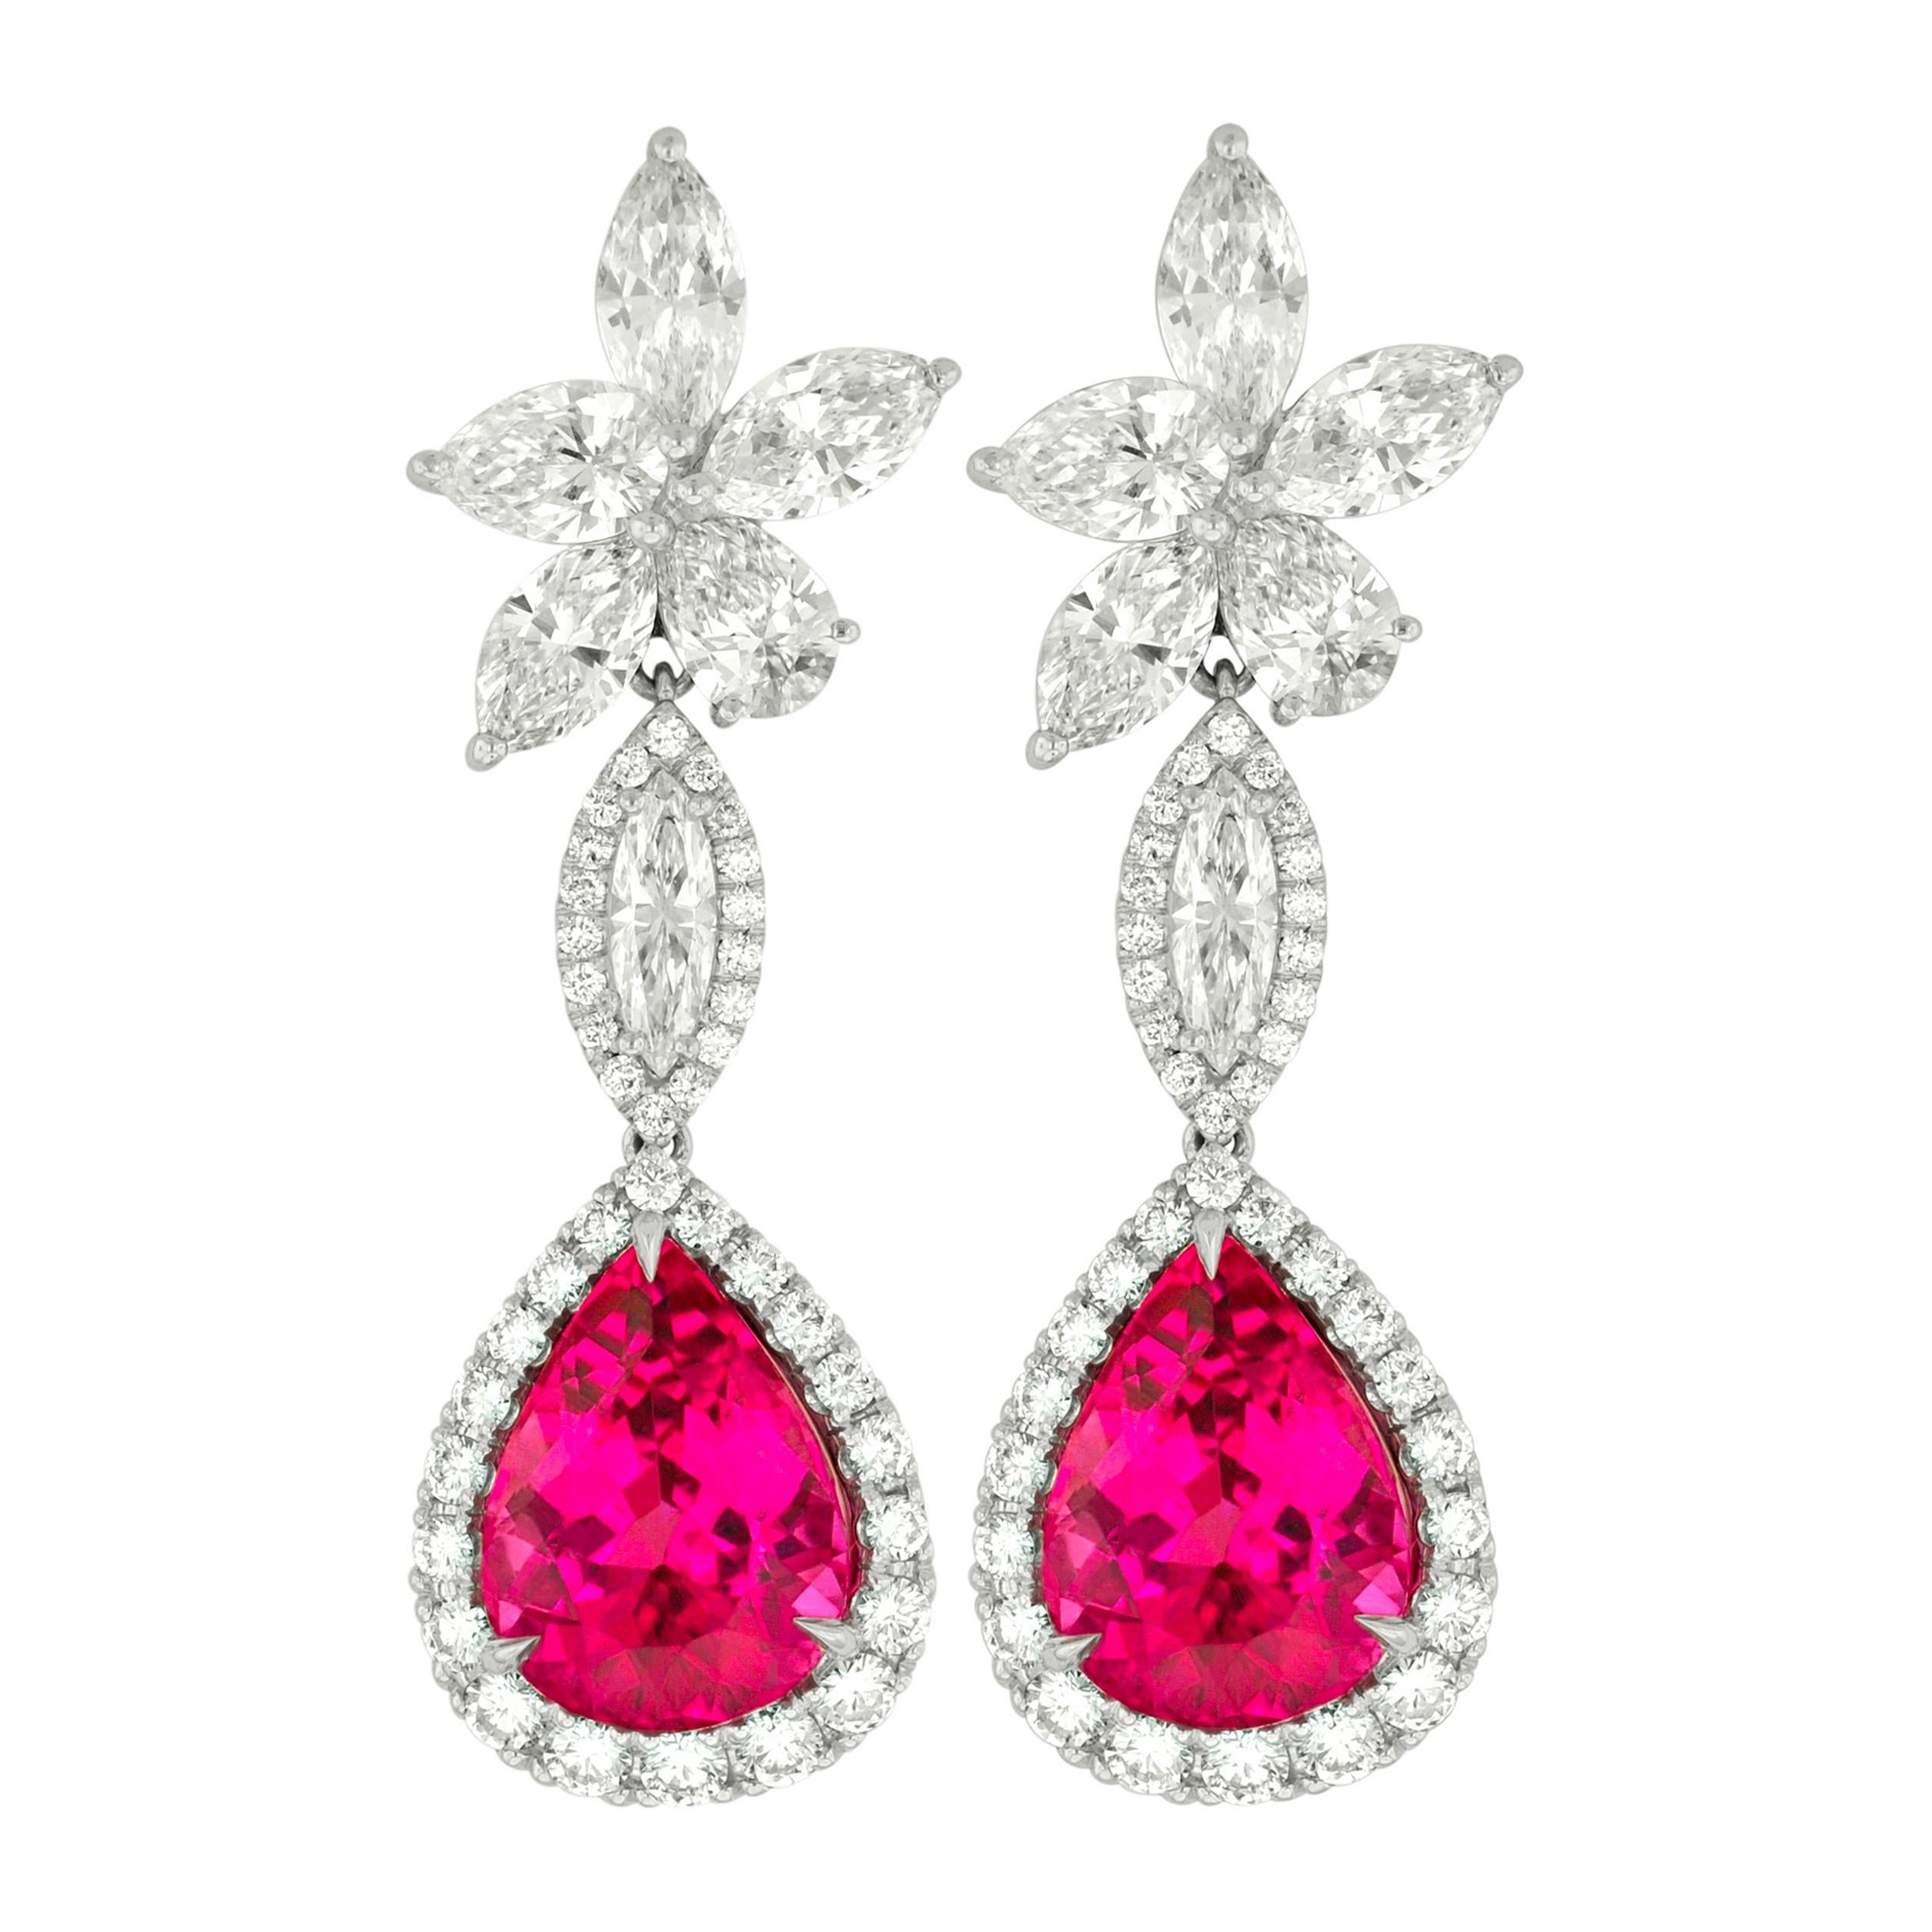 18kt White Gold Cluster Pink Tourmaline and Diamonds Earrings